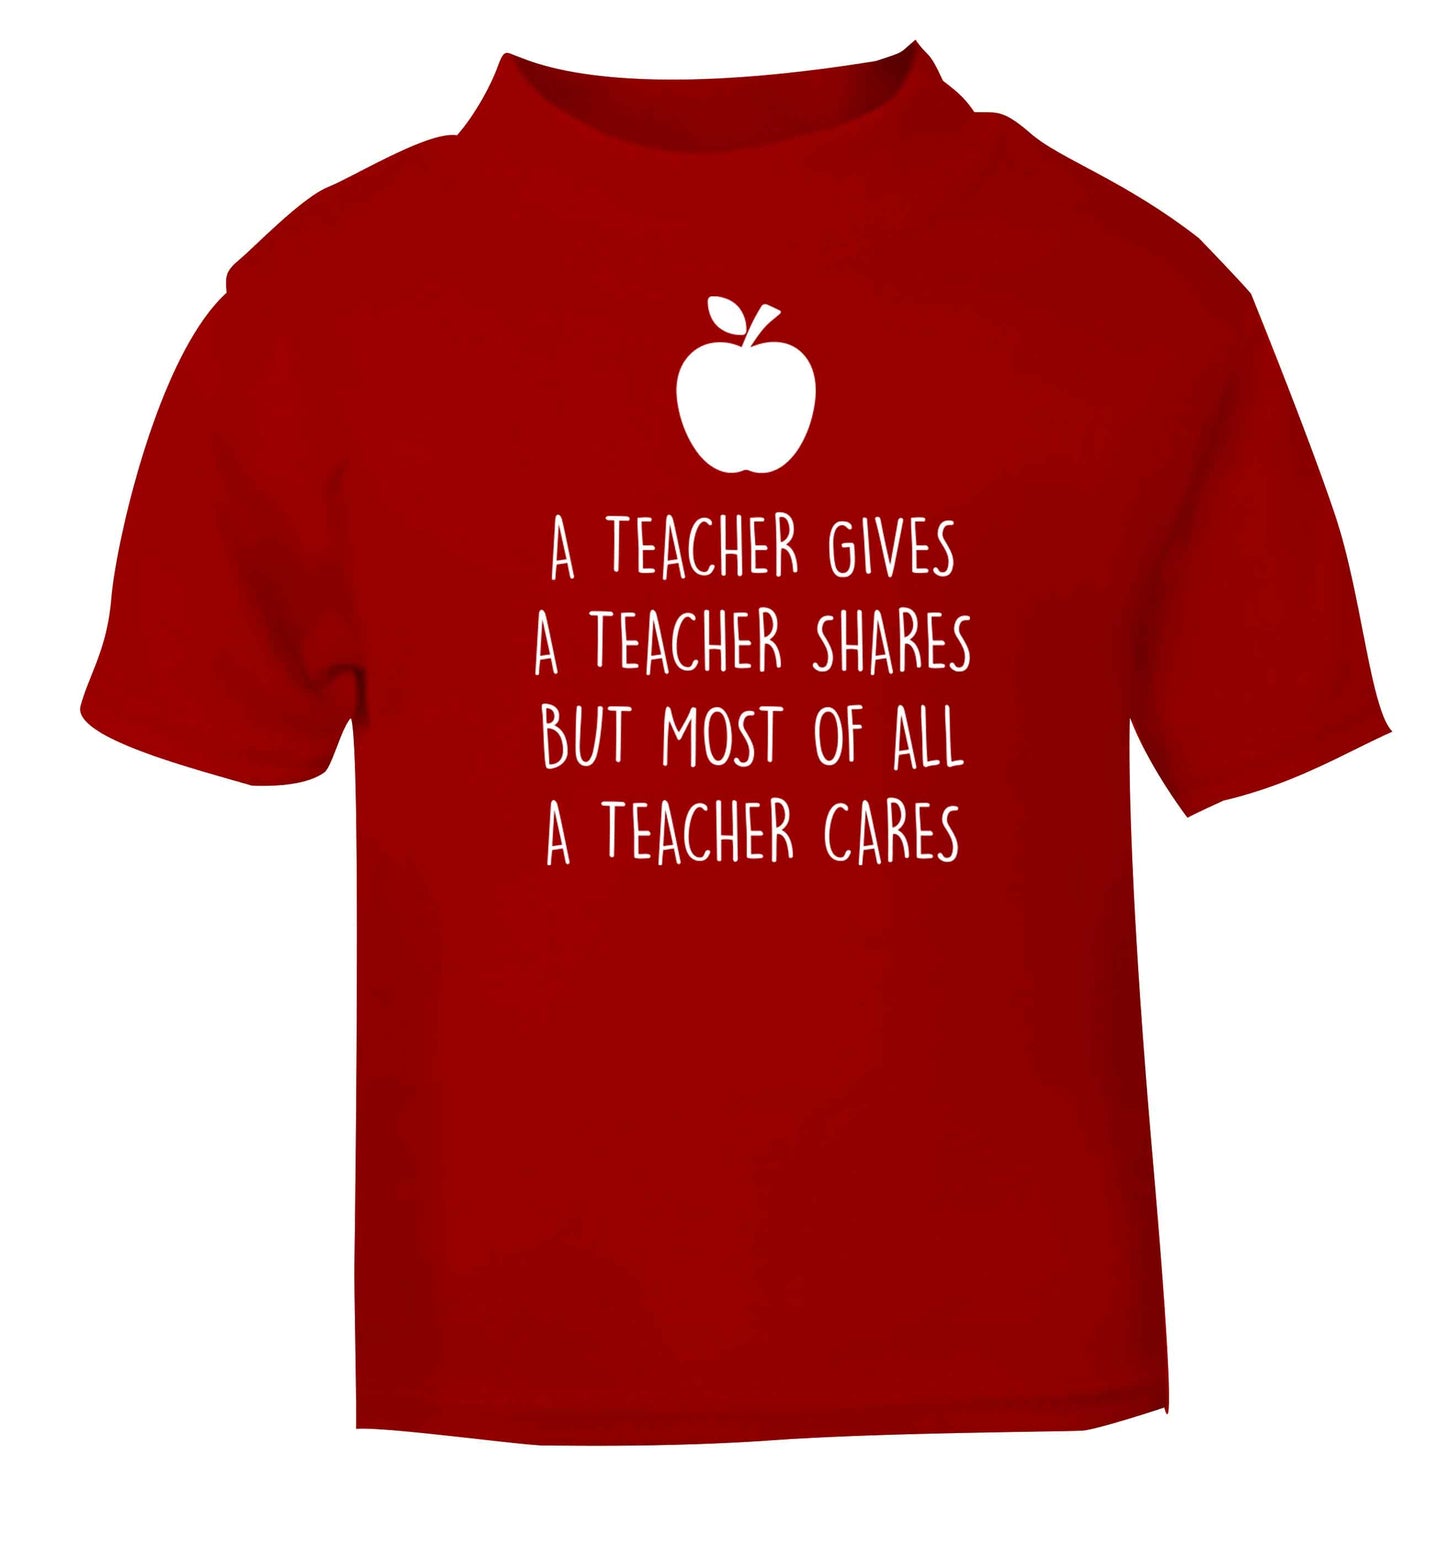 A teacher gives a teacher shares but most of all a teacher cares red baby toddler Tshirt 2 Years